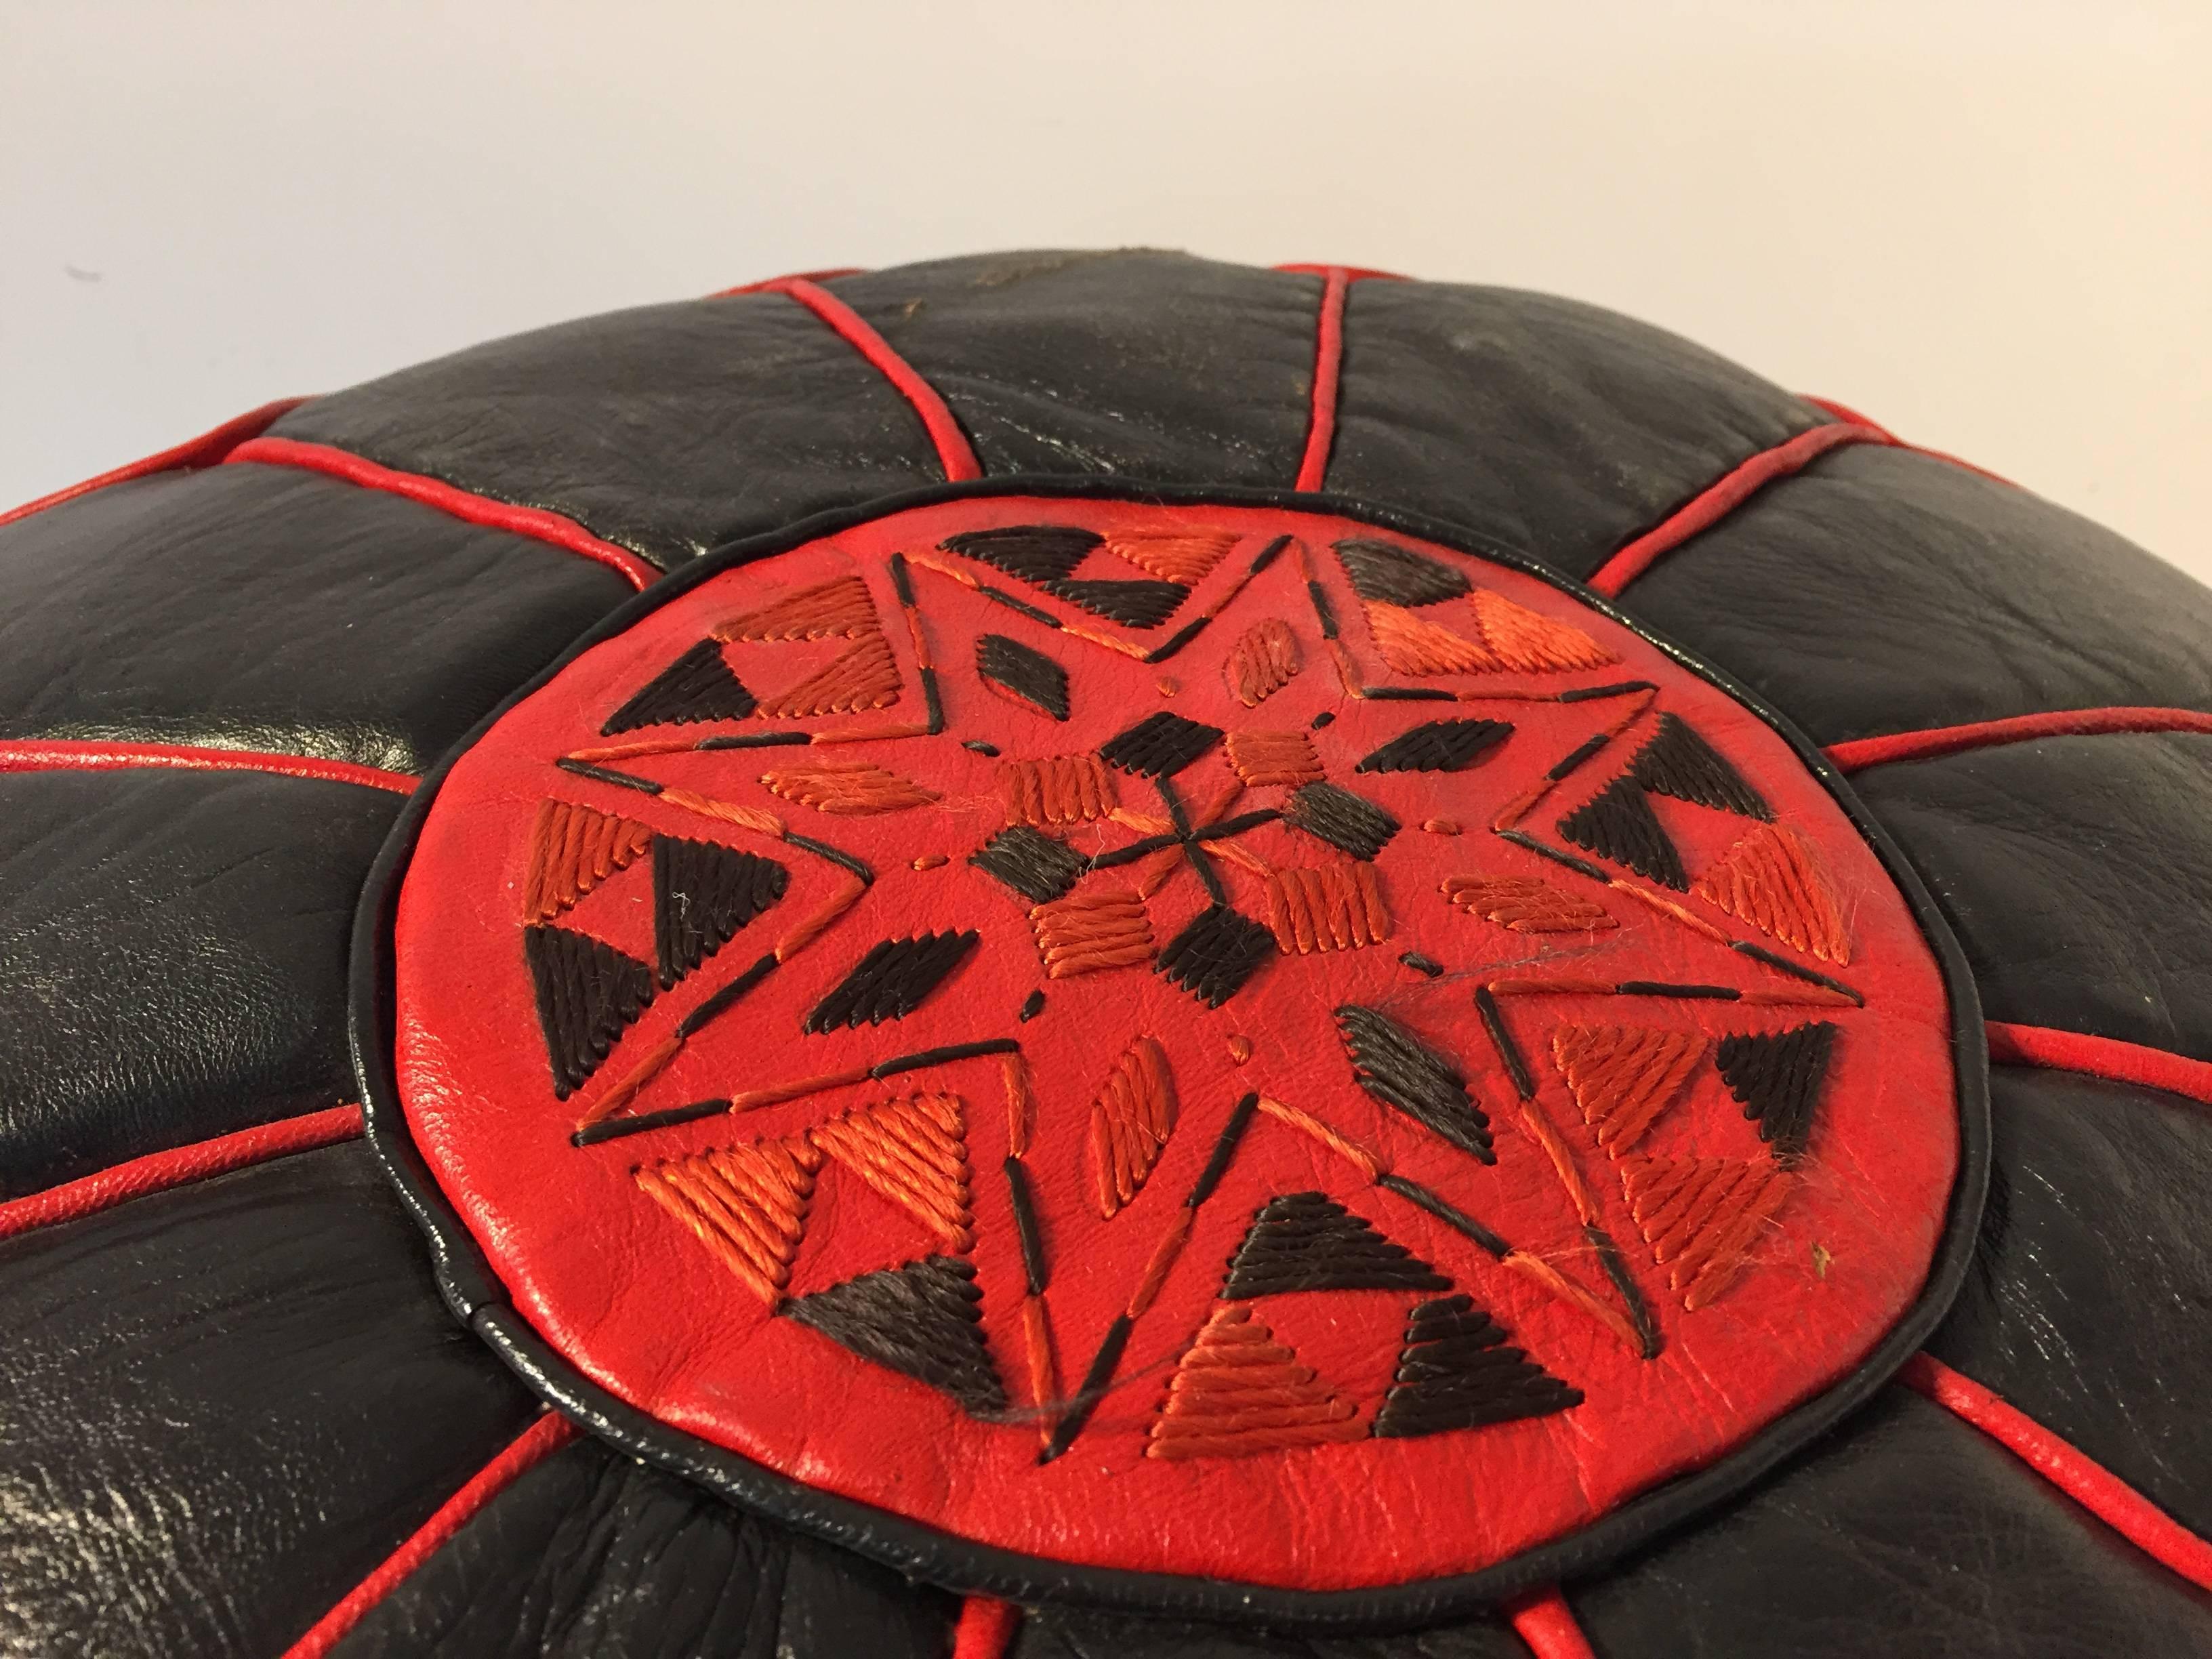 Moroccan Vintage Round Leather Pouf Red and Black (Marokkanisch)